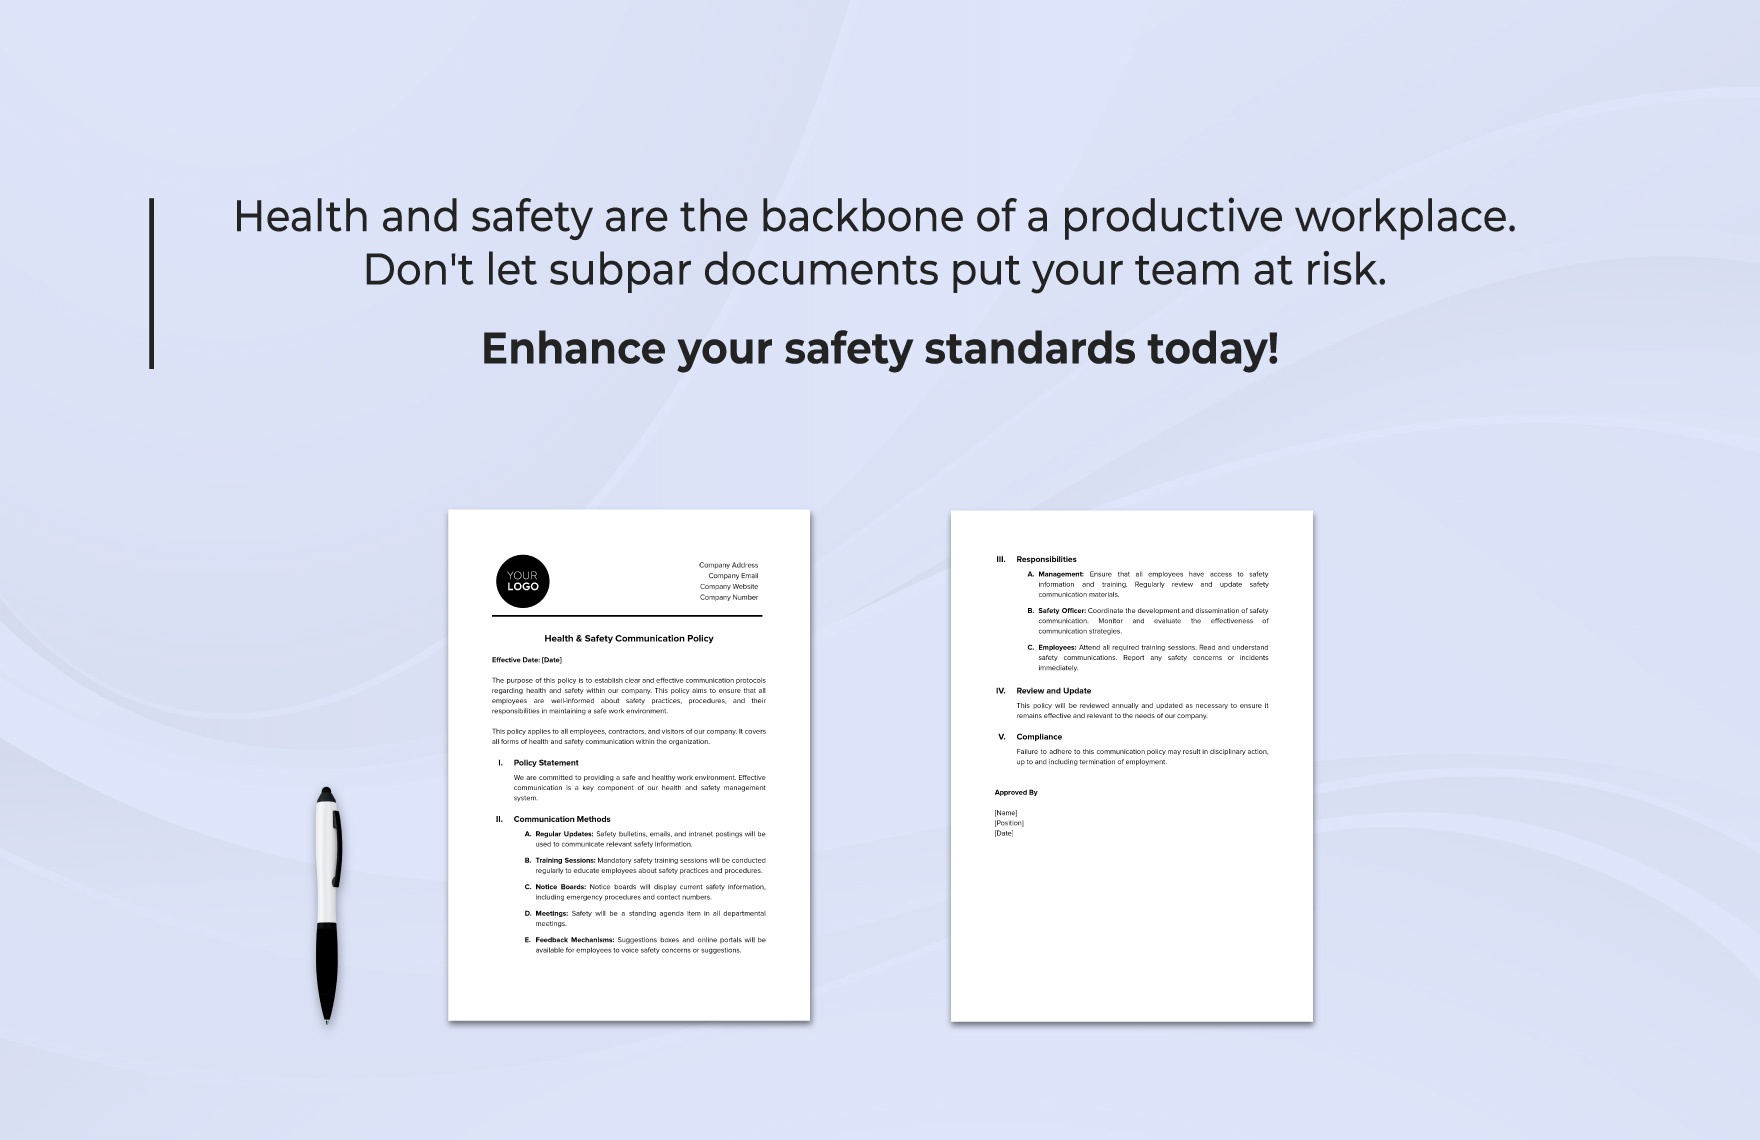 Health & Safety Communication Policy Template